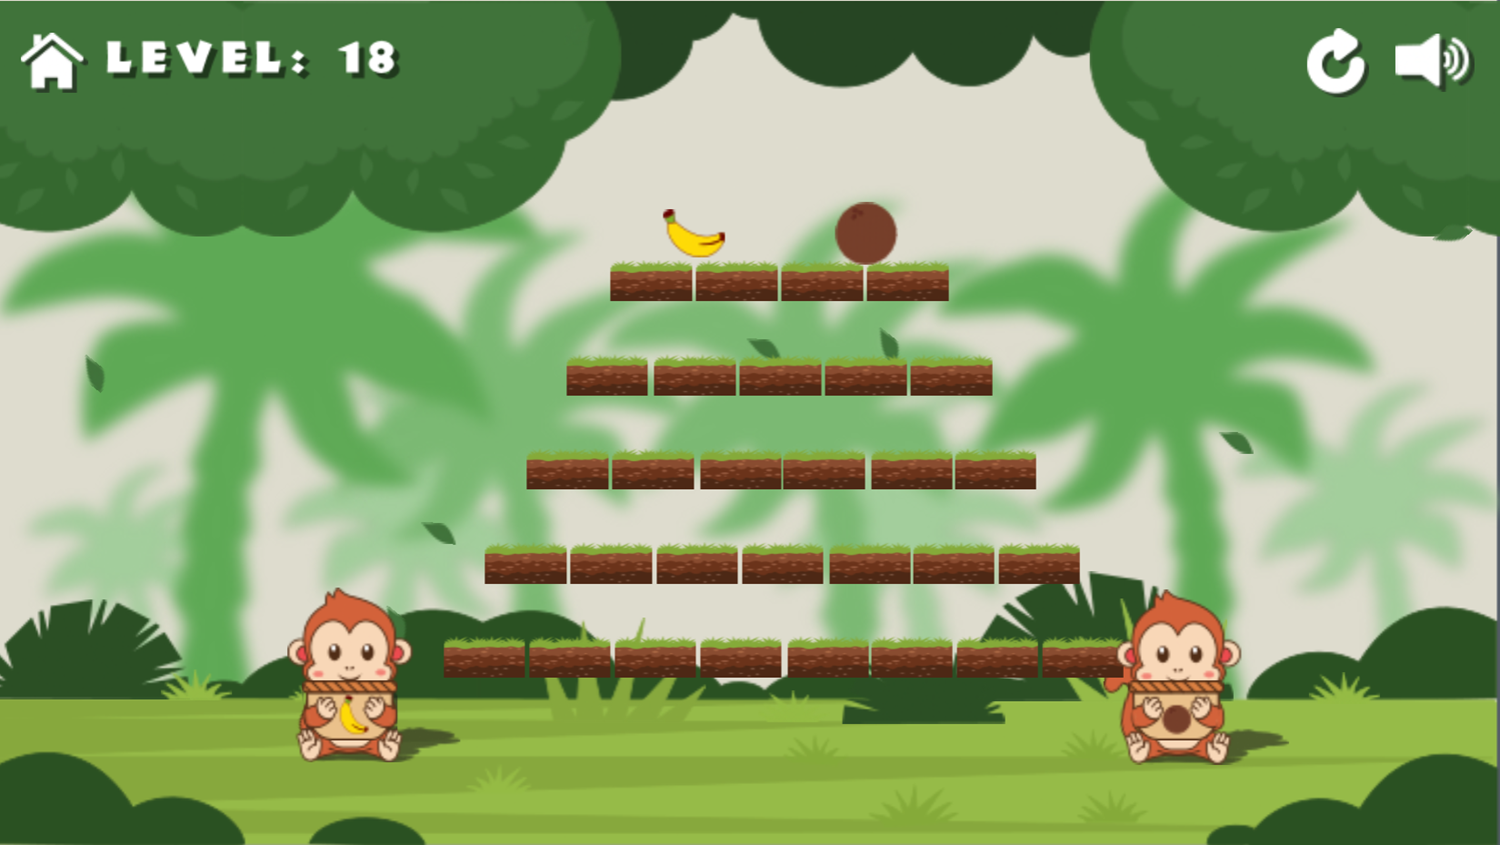 Monkeys and Fruits Game Level With Two Fruits Screenshot.